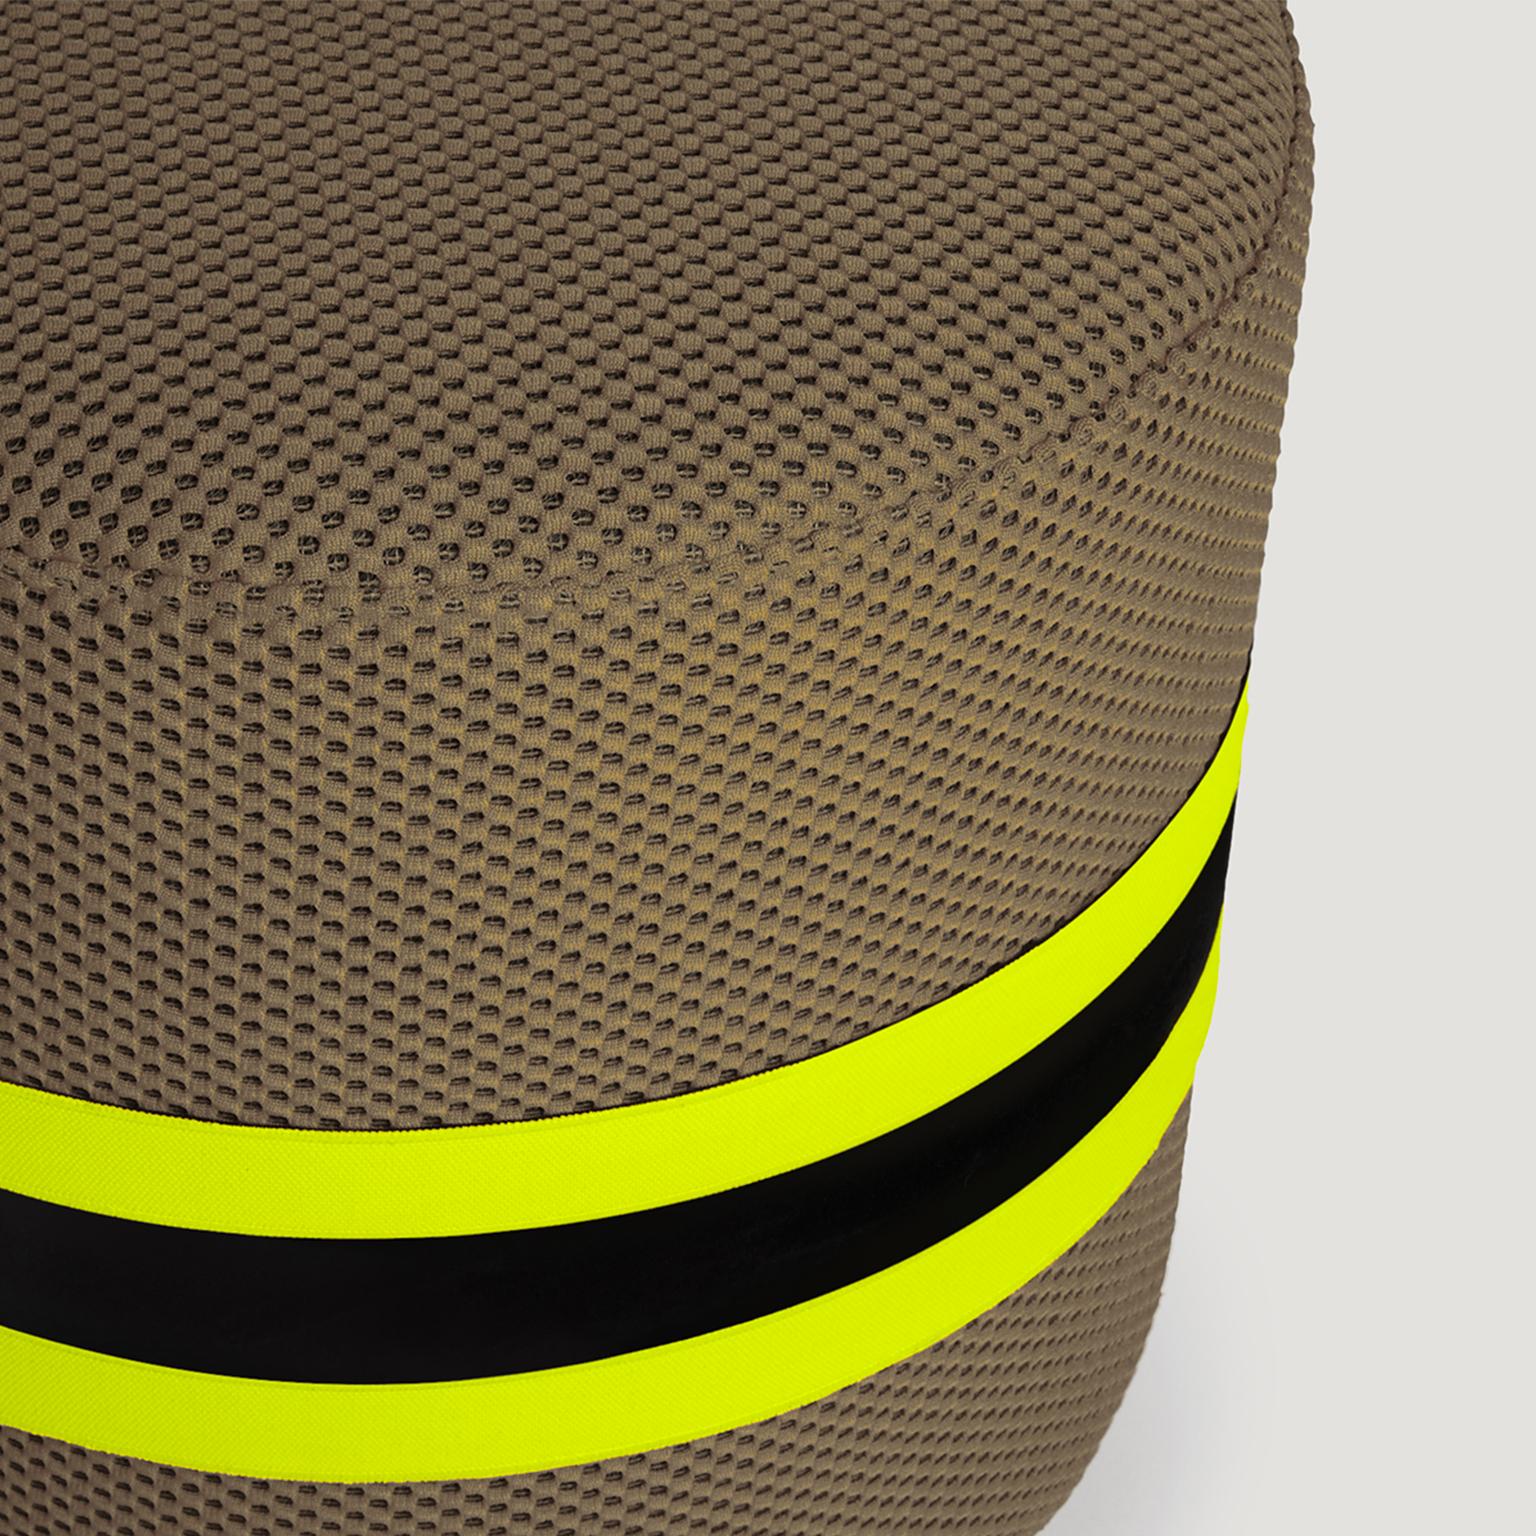 Stool with polyurethane base upholstered in Body Building fabric with elastic synthetic bands in neon yellow and black.
In “Body Building” the objects are dissected and studied, designed to elude the perception of the viewer, to discover a world